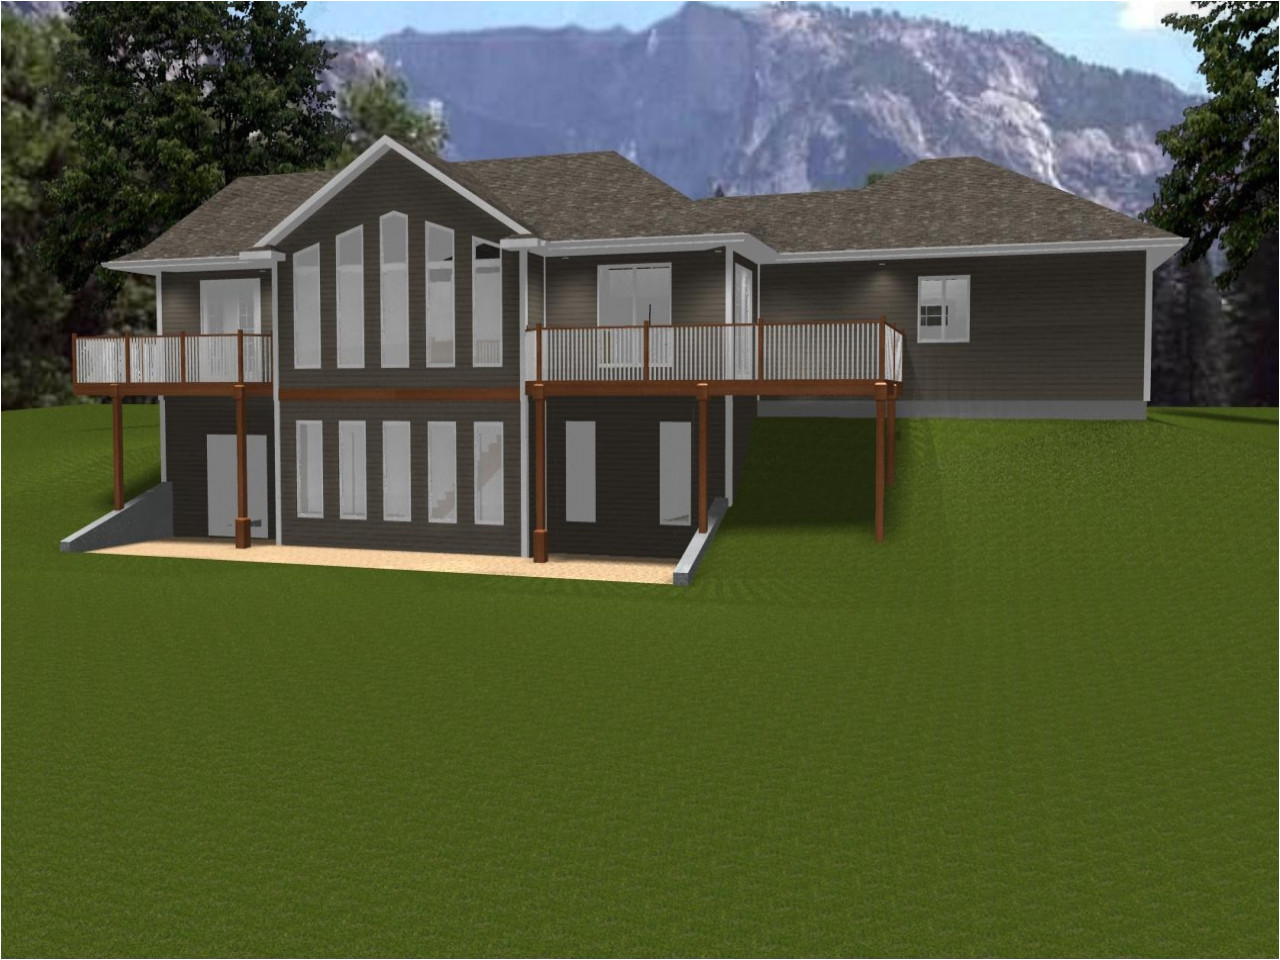 Ranch Home with Walkout Basement Plans Ranch House Plans with Walkout Basement Ranch House Plans